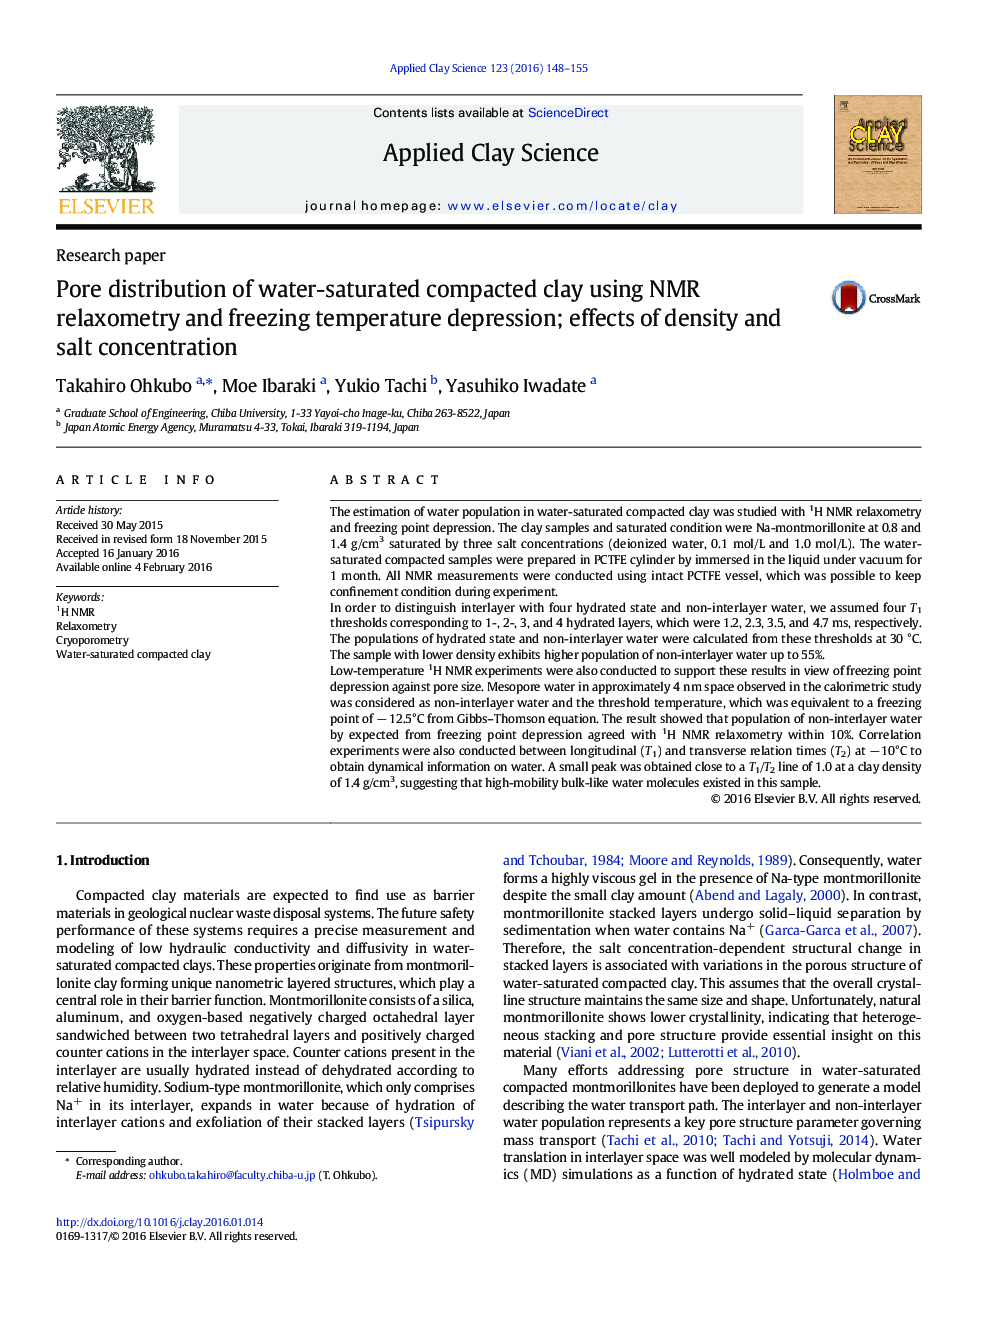 Pore distribution of water-saturated compacted clay using NMR relaxometry and freezing temperature depression; effects of density and salt concentration